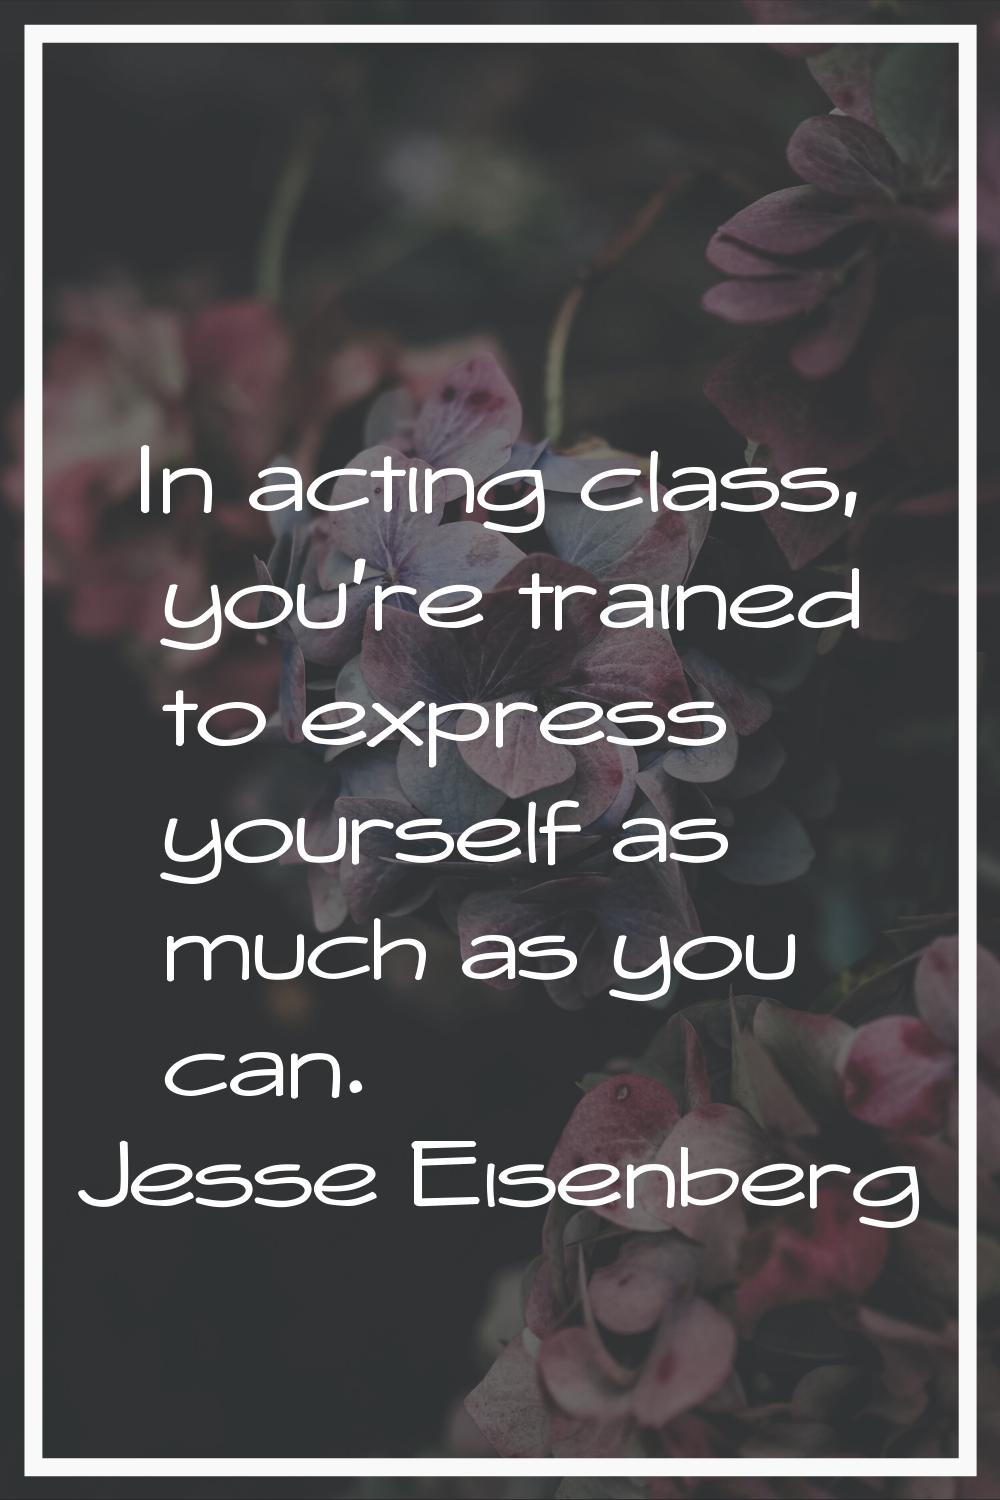 In acting class, you're trained to express yourself as much as you can.